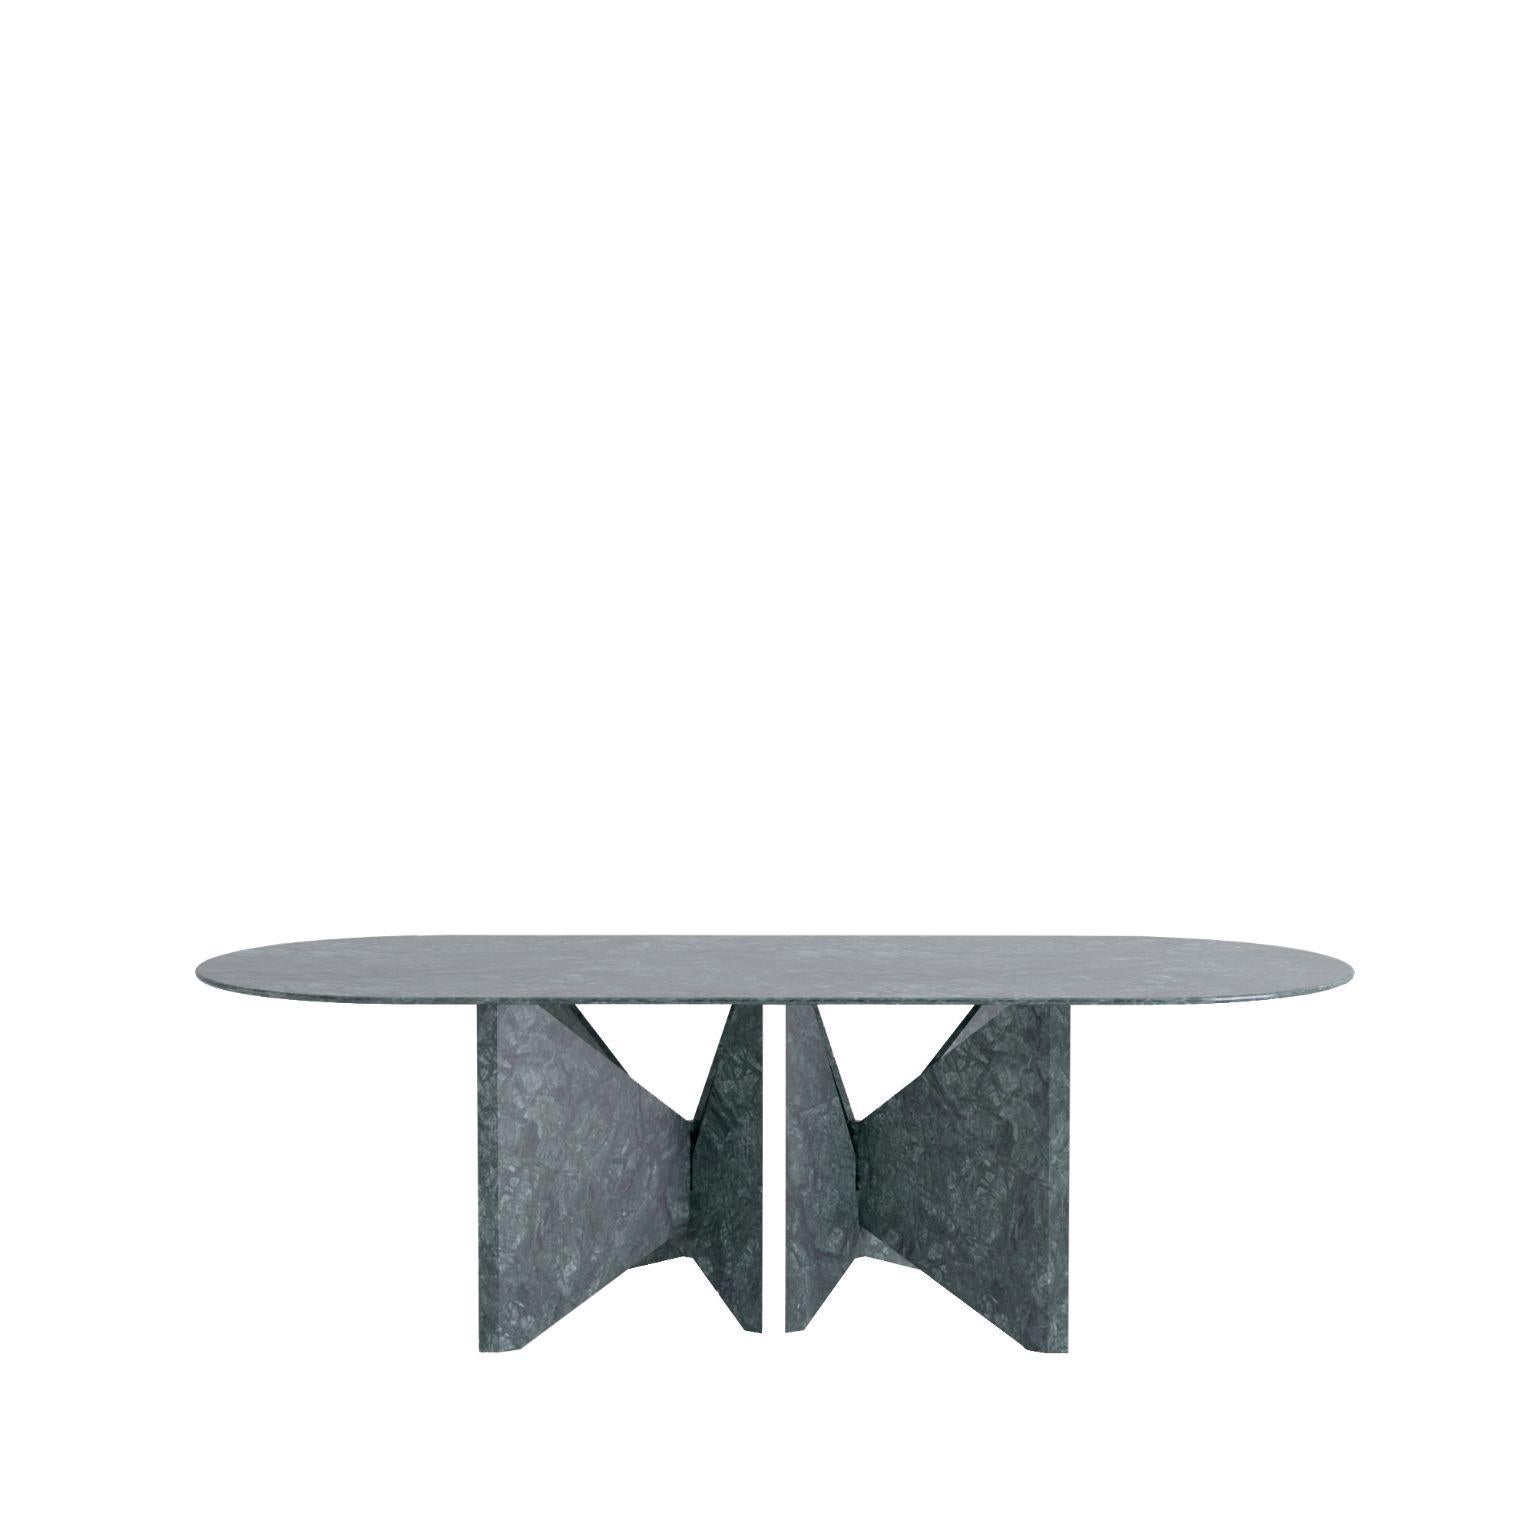 Lamina Oblong Table by Hannes Peer
Dimensions:D250 x W60 x H76.5 cm
Materials: Indian Green marble.
Also available in different finishes. Please contact us.

Lamina is a dinner table relying on the intersection of marble slabs. Hannes Peer drew his